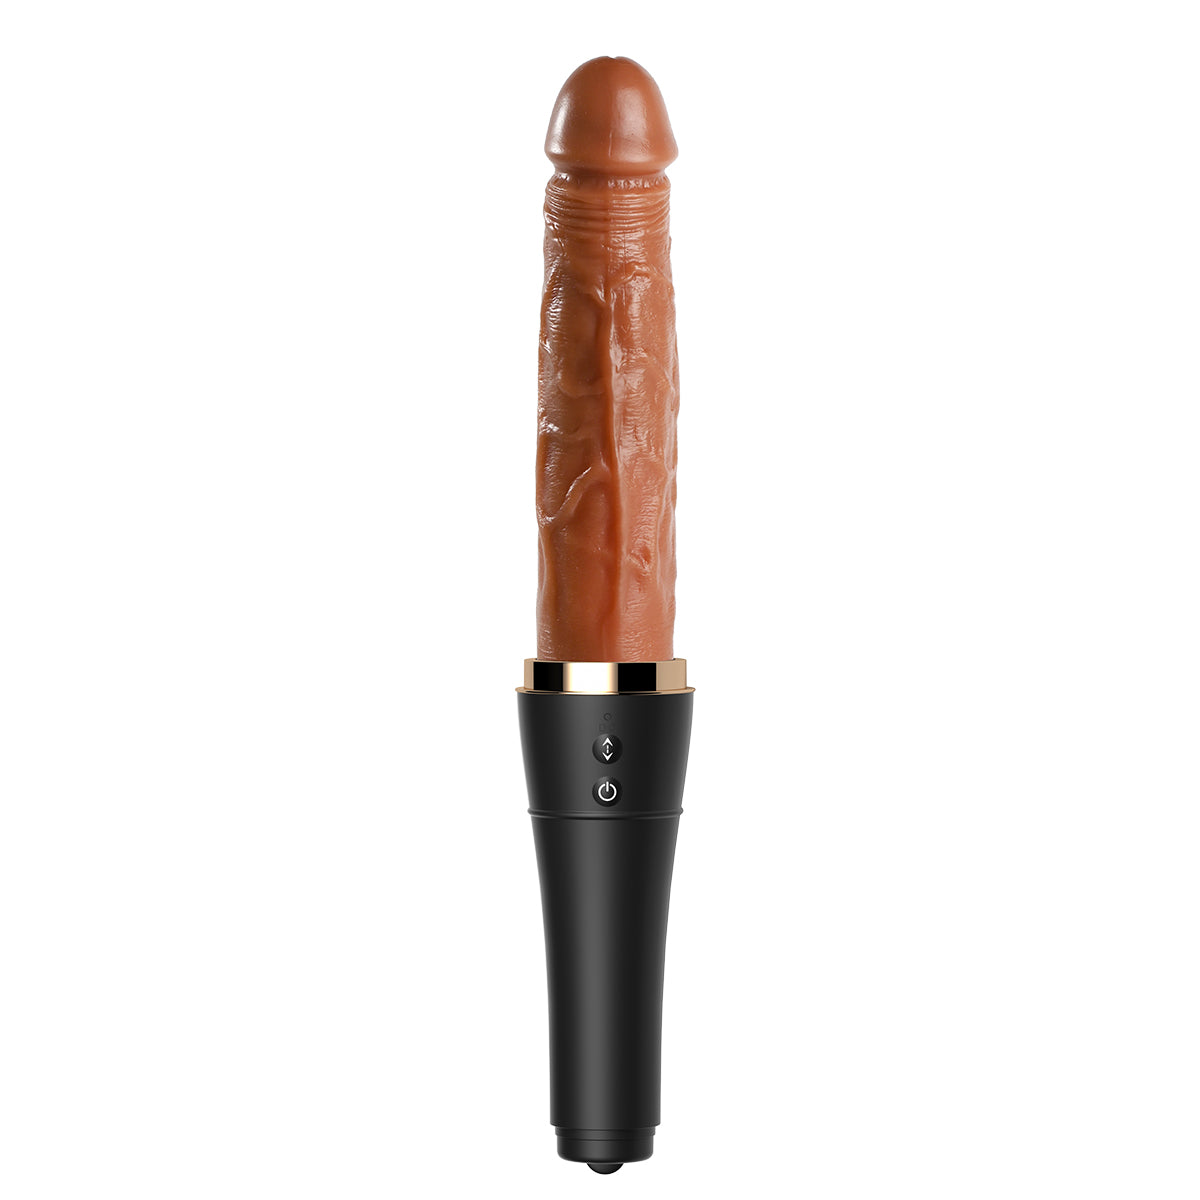 Showeggs 10 Vibration Thrusting Mode Lifelike Electric Dildo with Heating Function